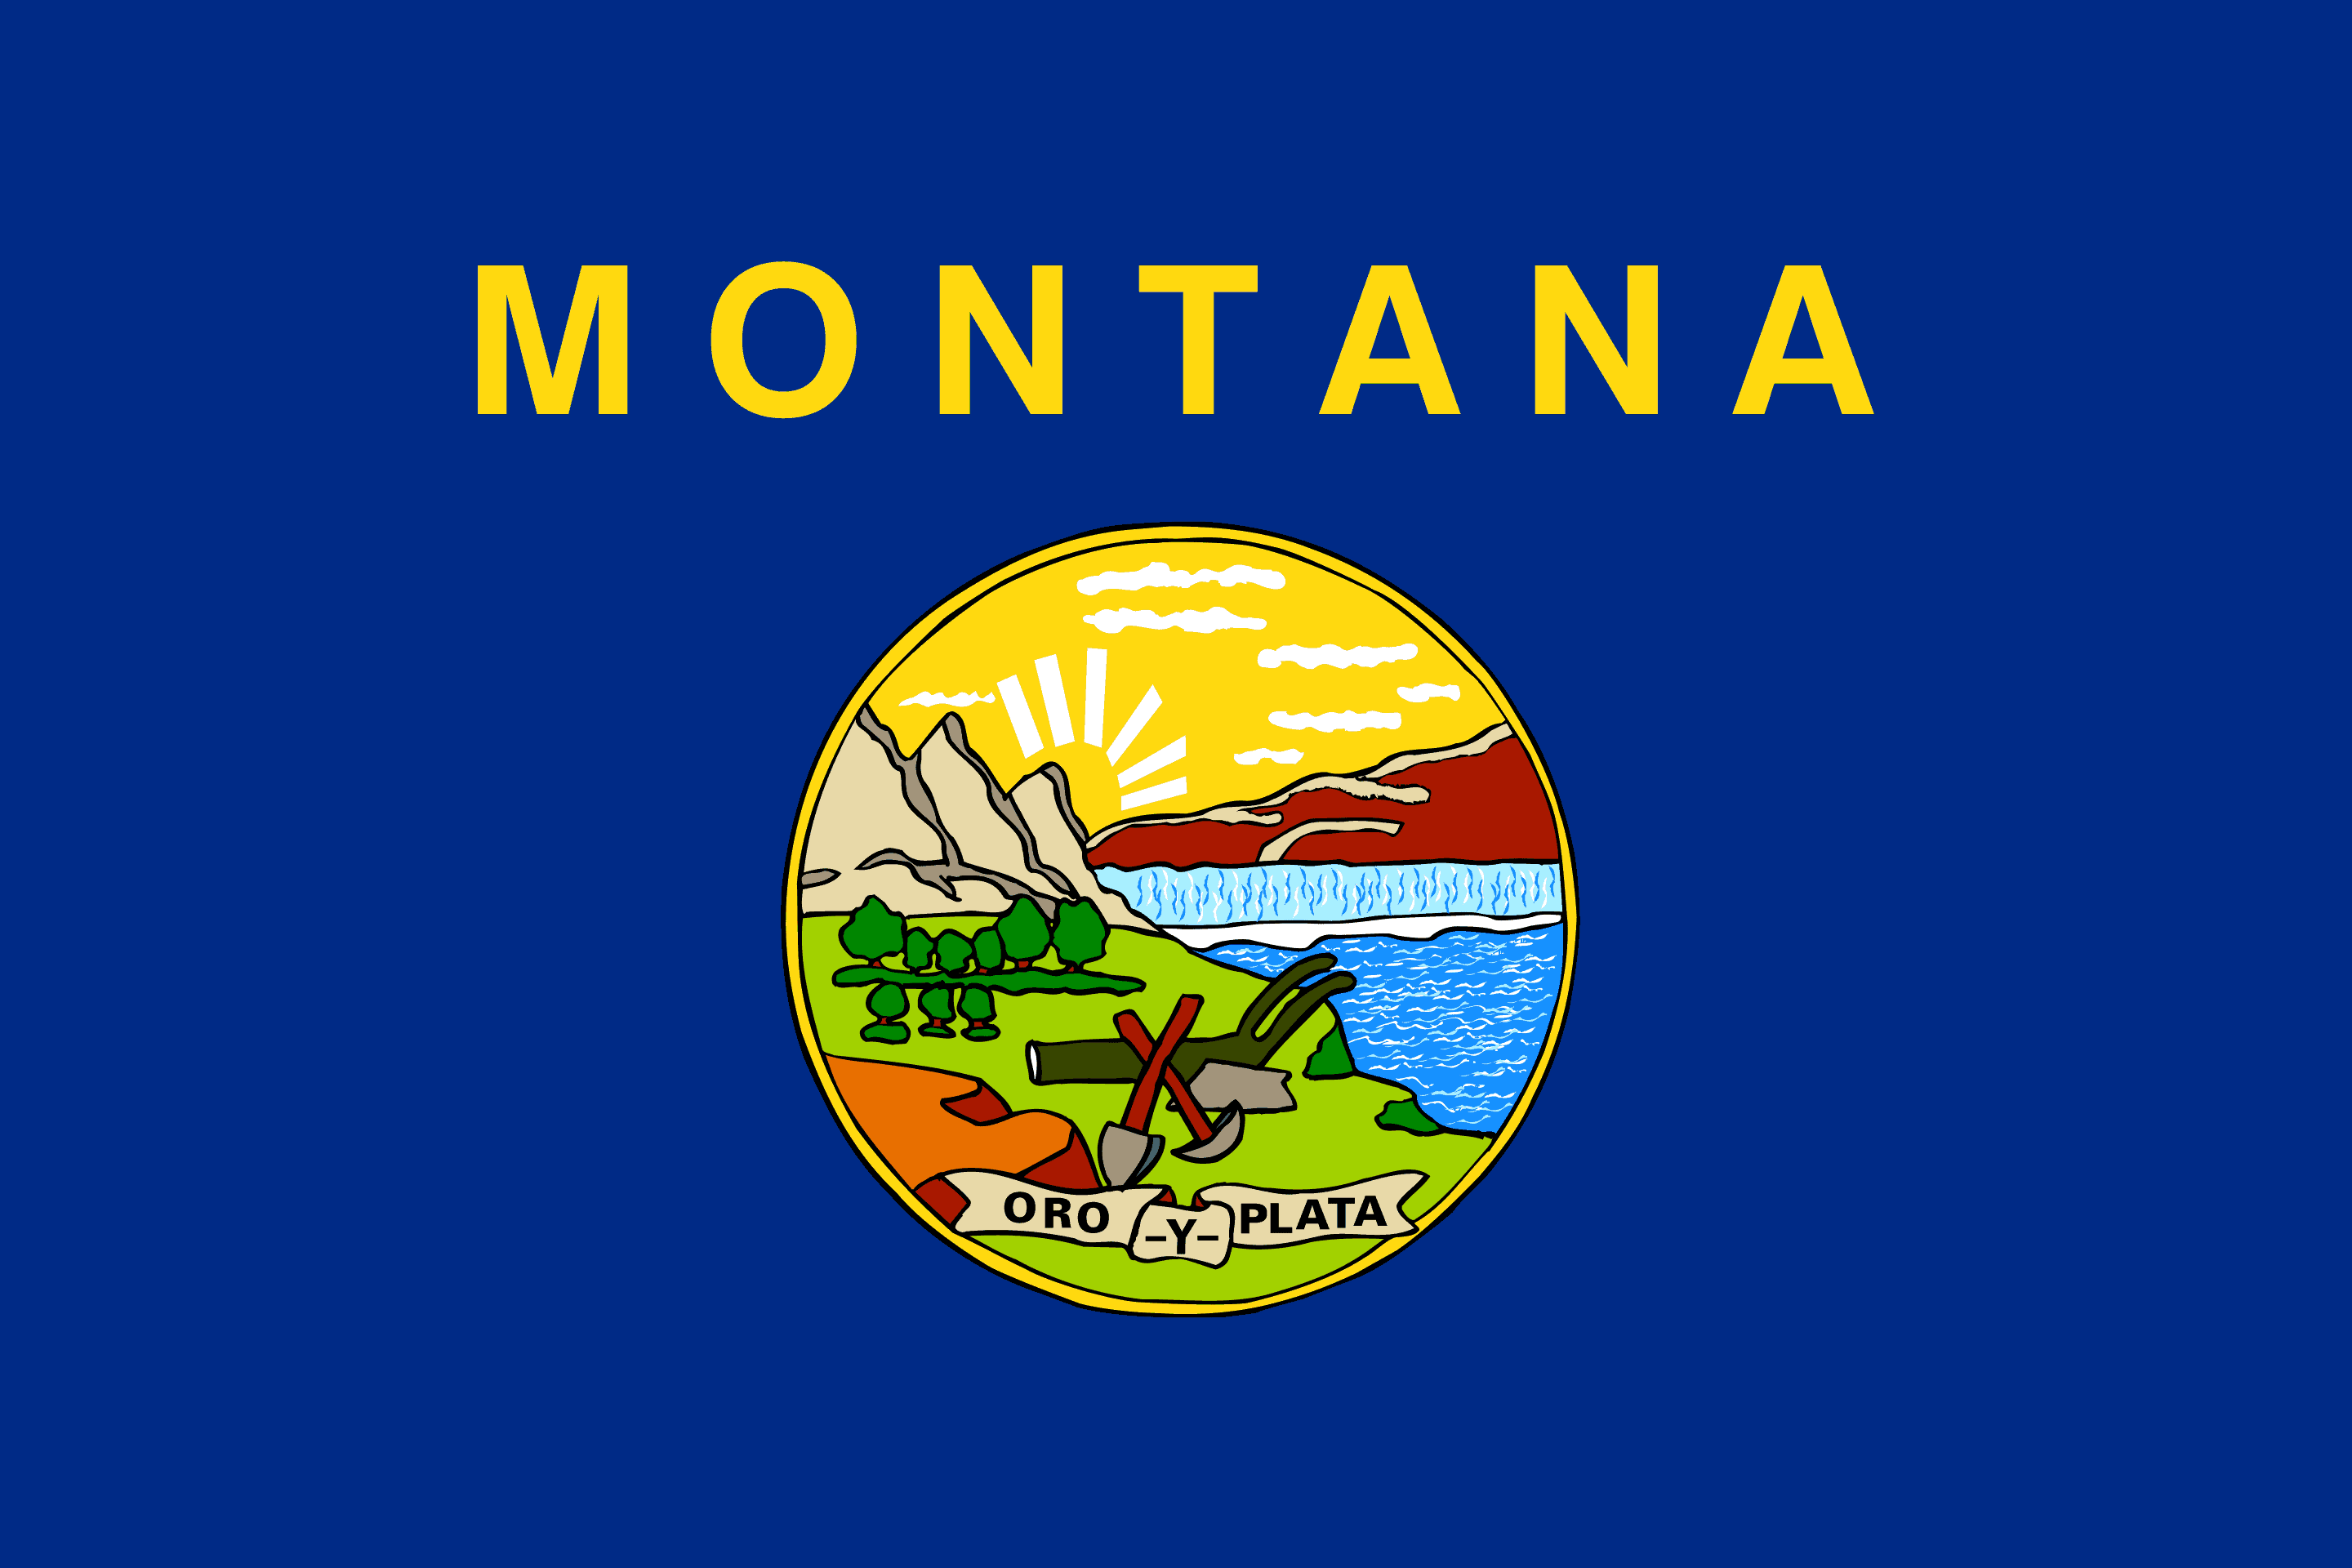 Drone Laws in Montana